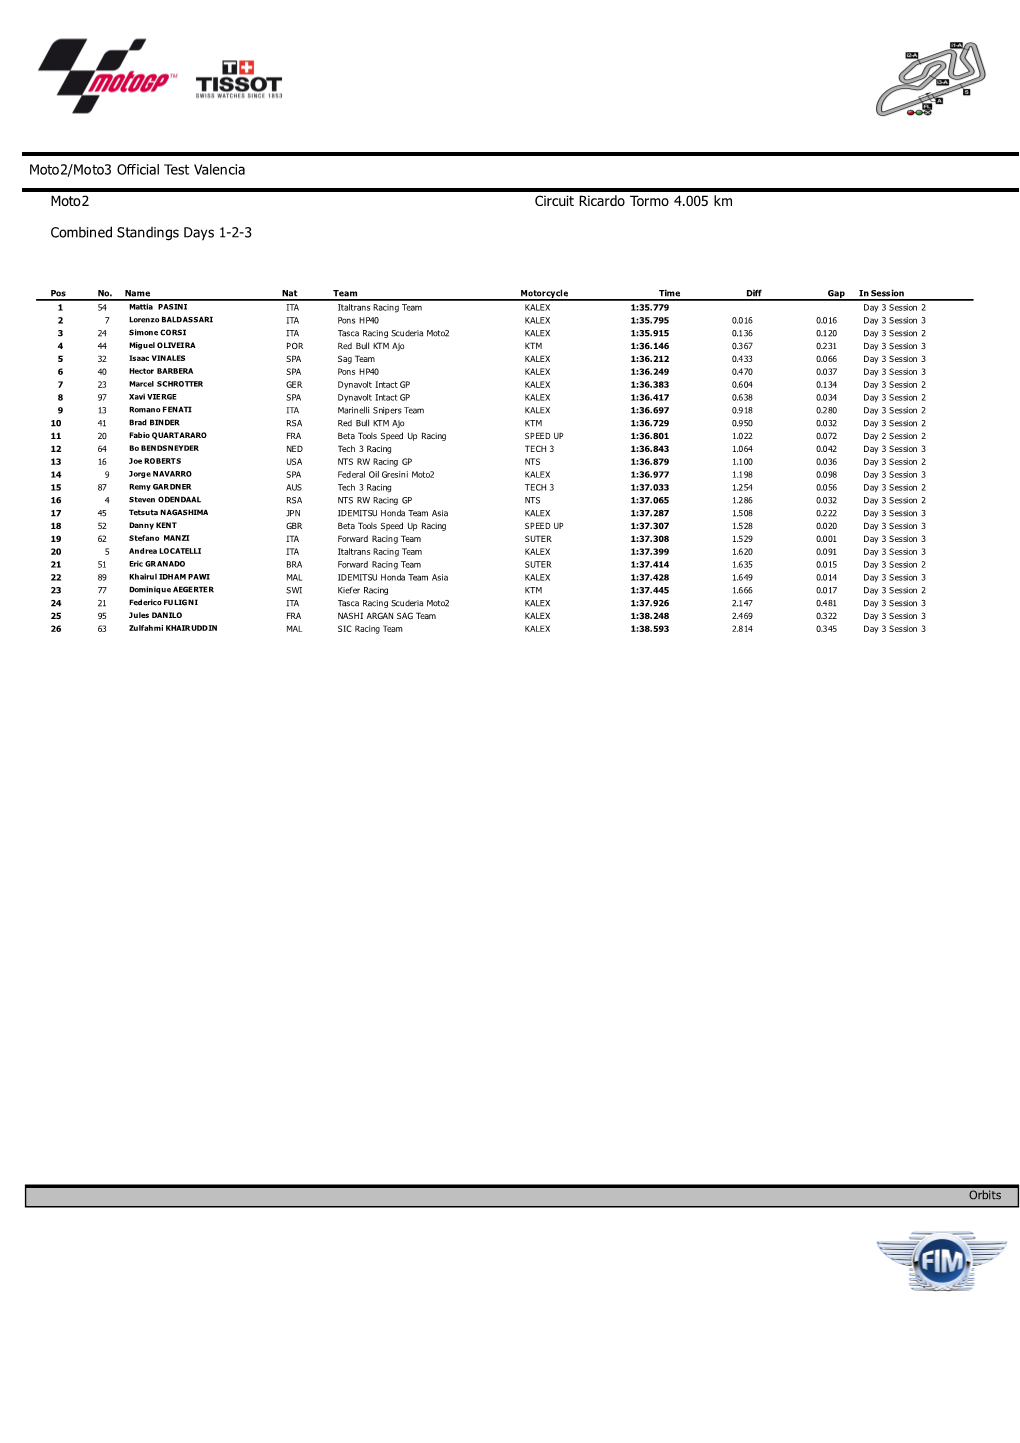 Moto2/Moto3 Official Test Valencia Moto2 Combined Standings Days 1